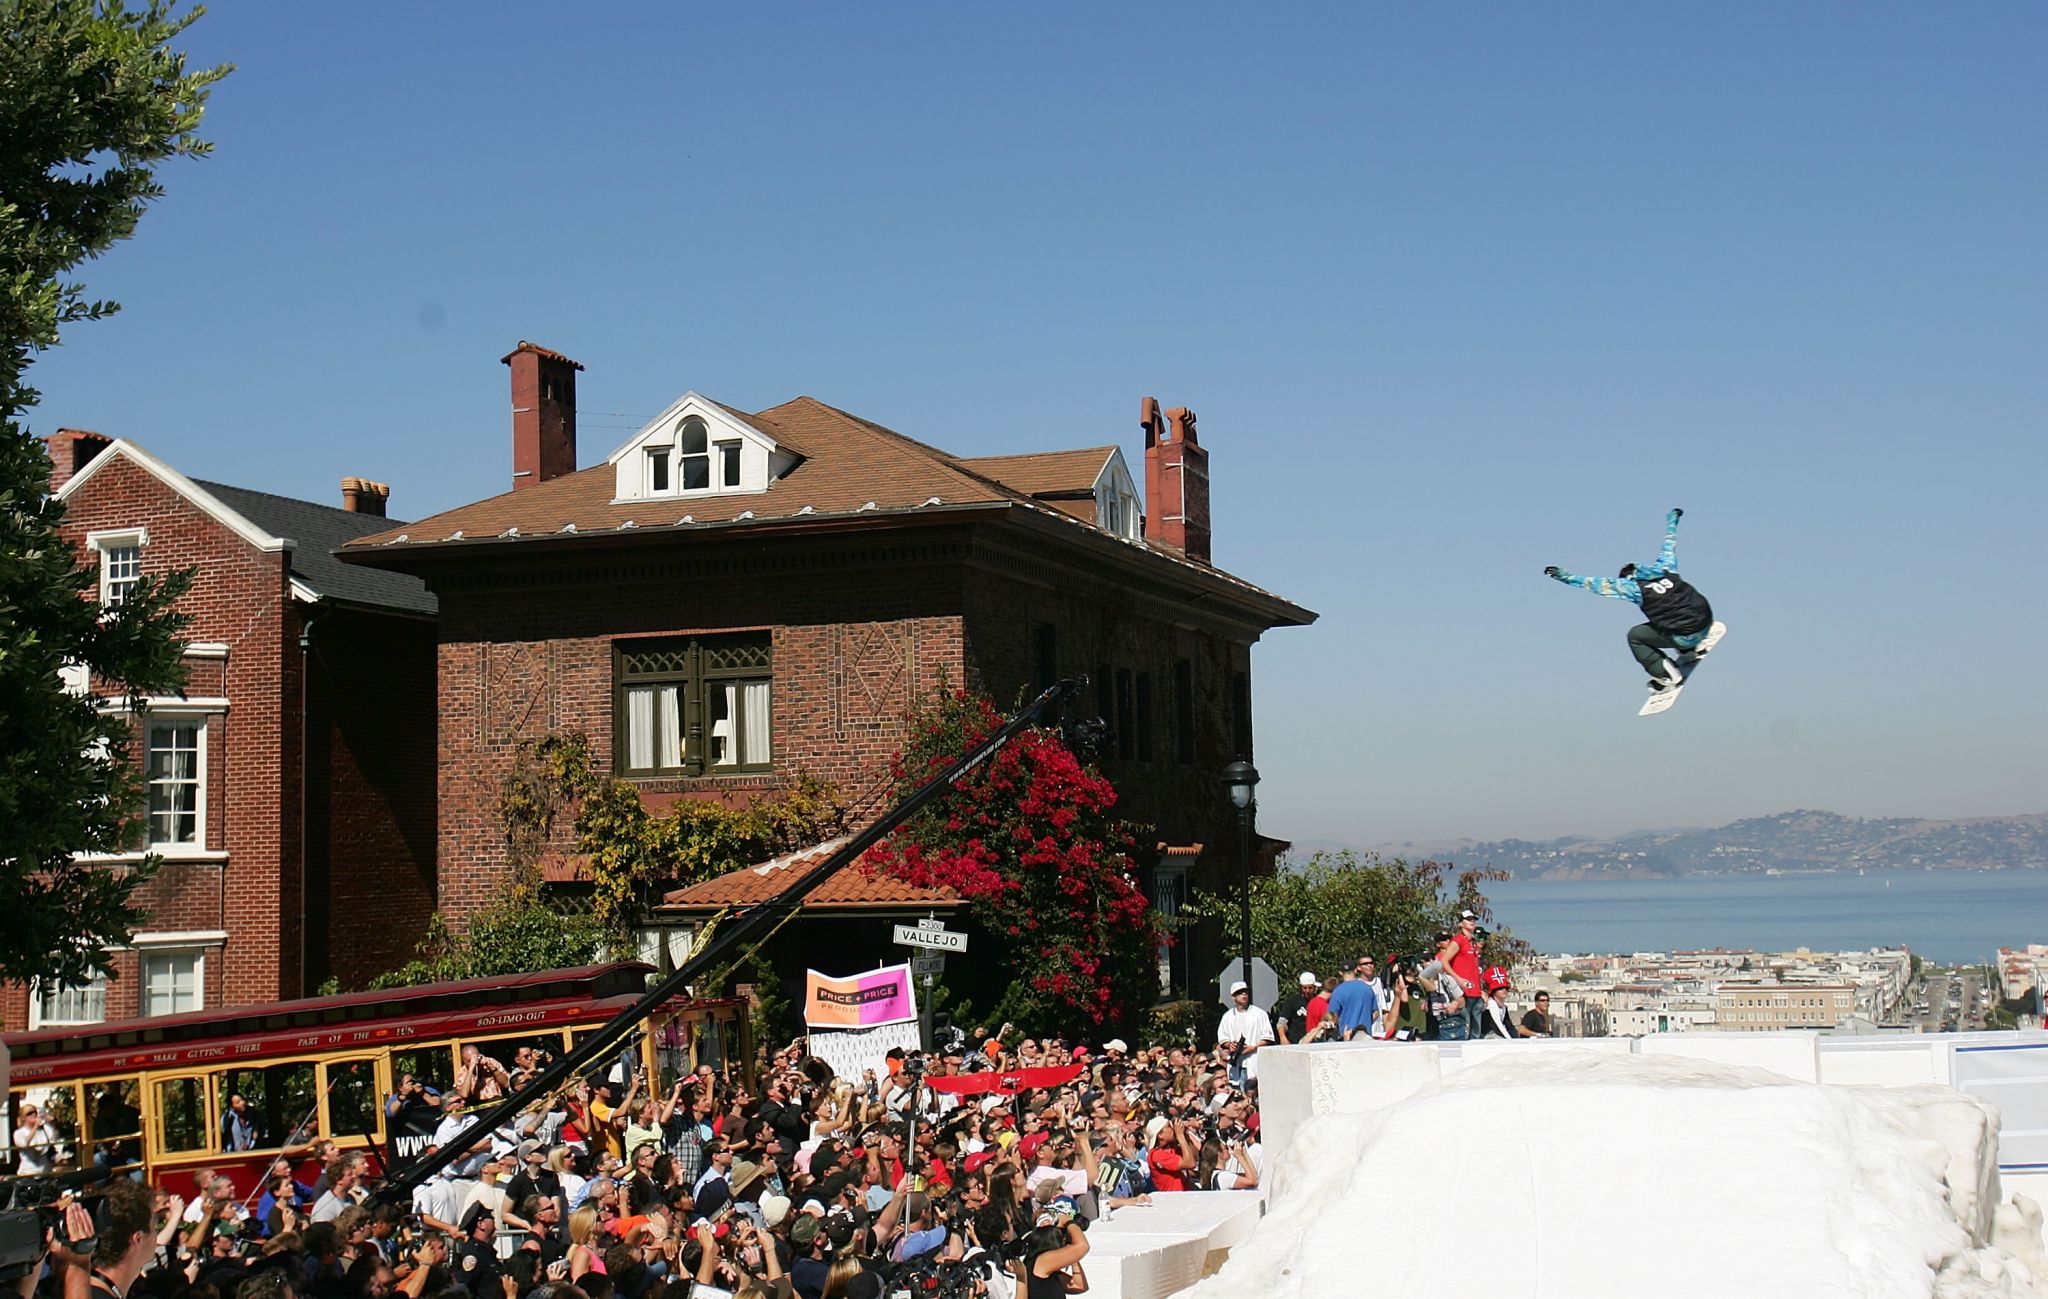 Remembering the controversy of the 2005 Fillmore Street ski jump